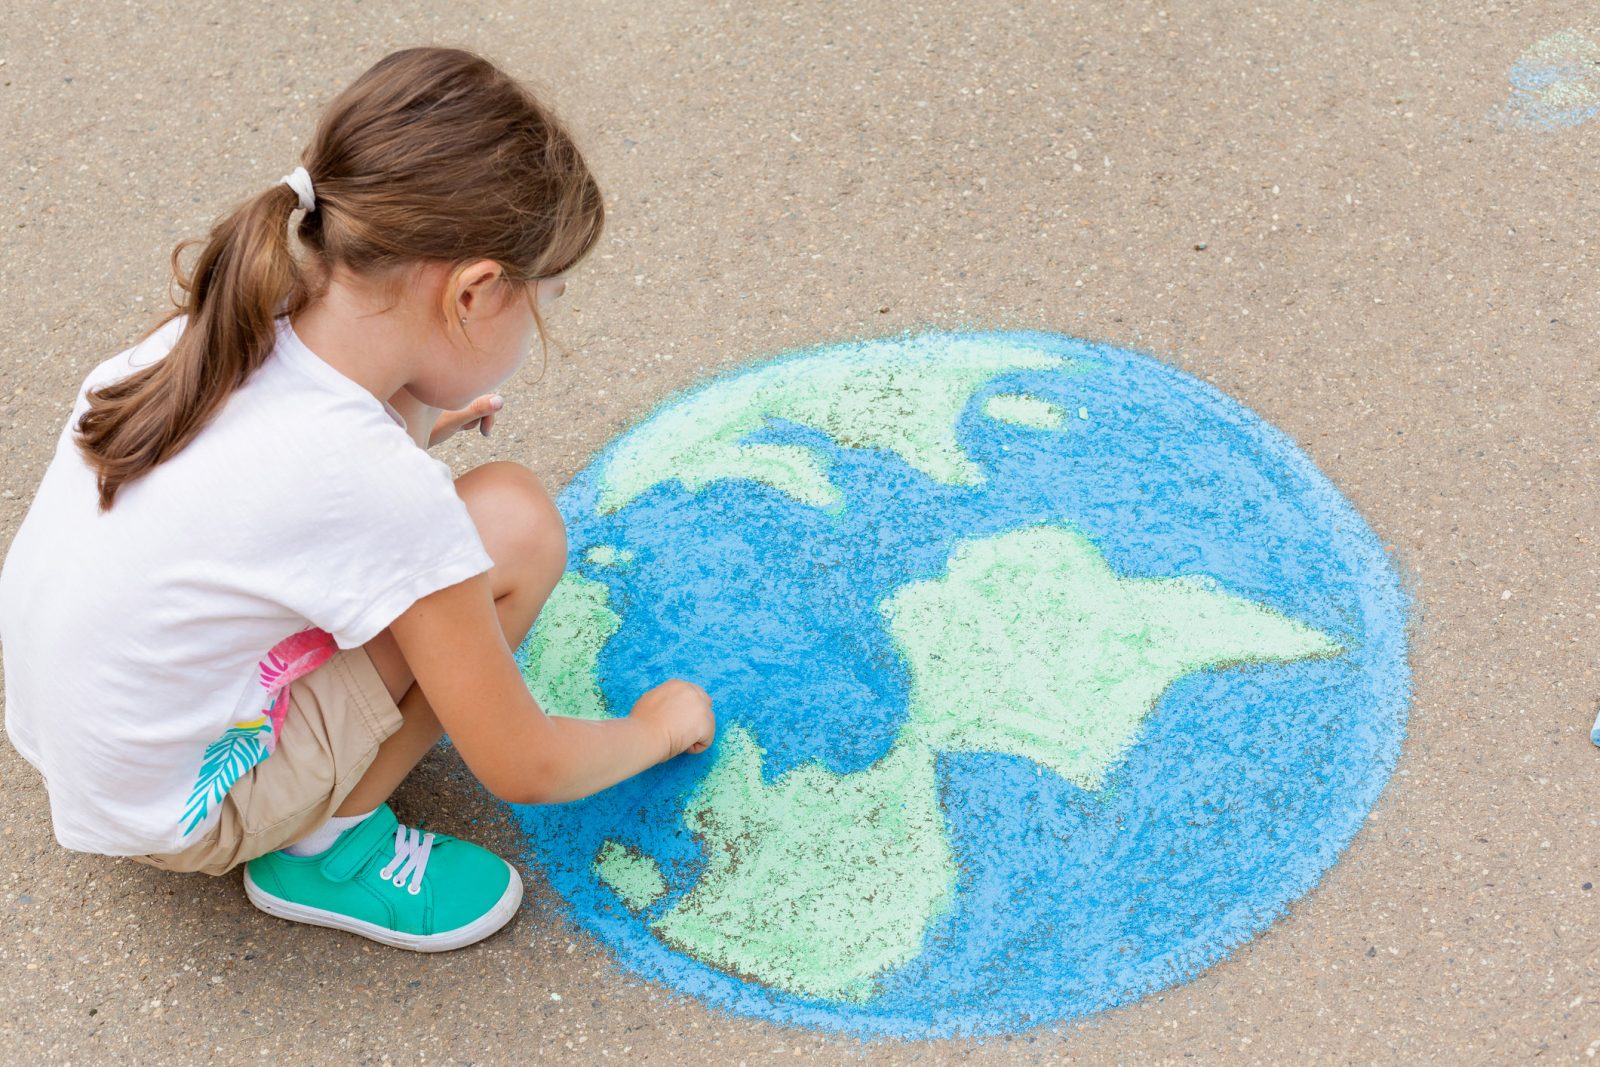 A young girl crouches over a chalk drawing of Earth on concrete.